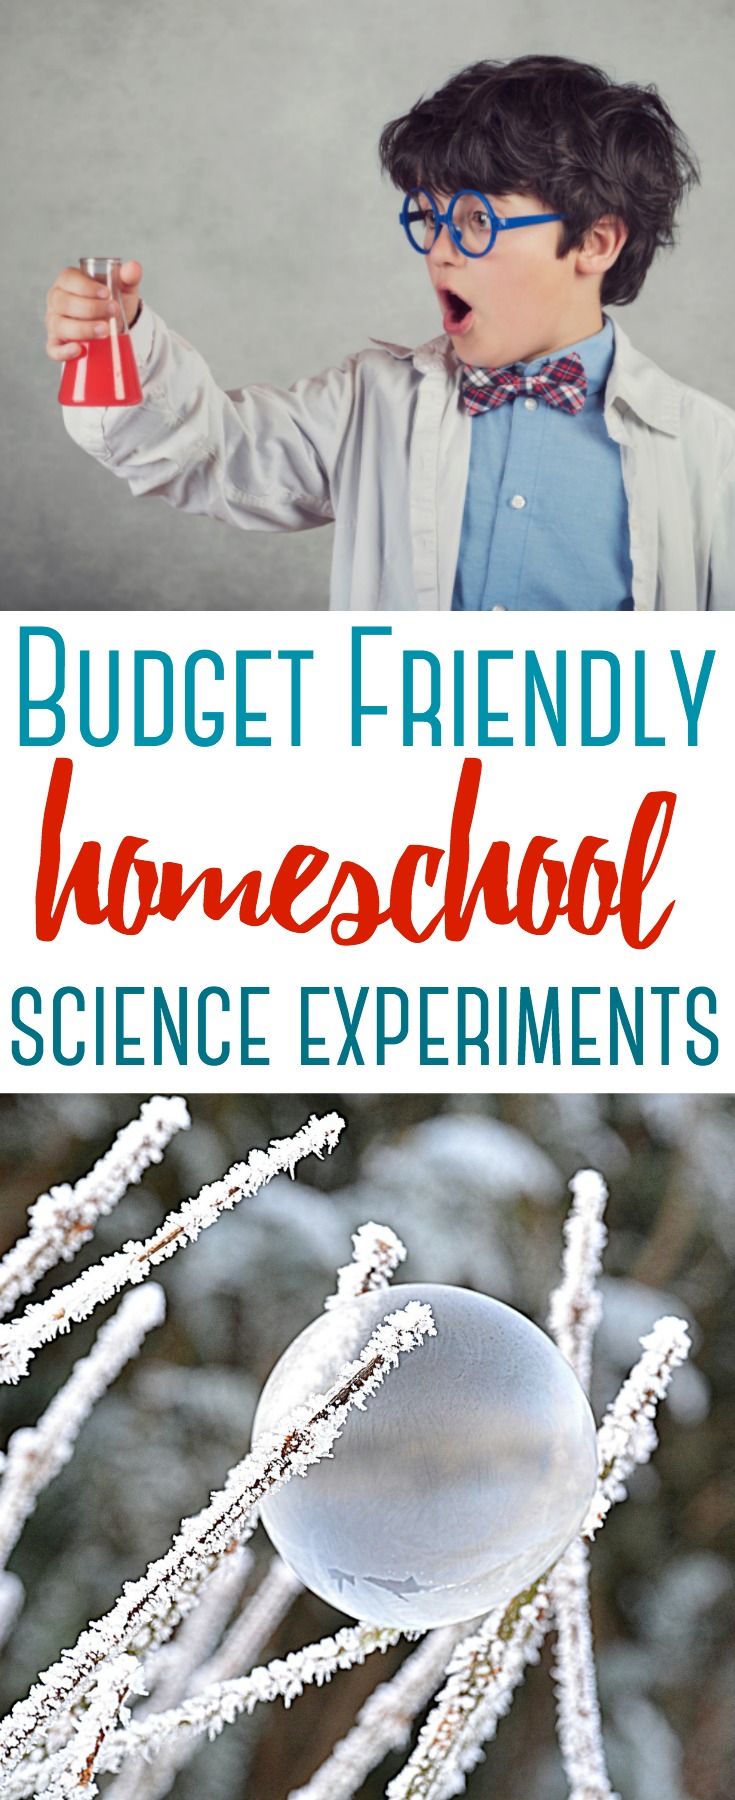 These science activities and projects will get your kids excited about learning science. Here are 7 Budget Friendly Homeschool Science Experiments!